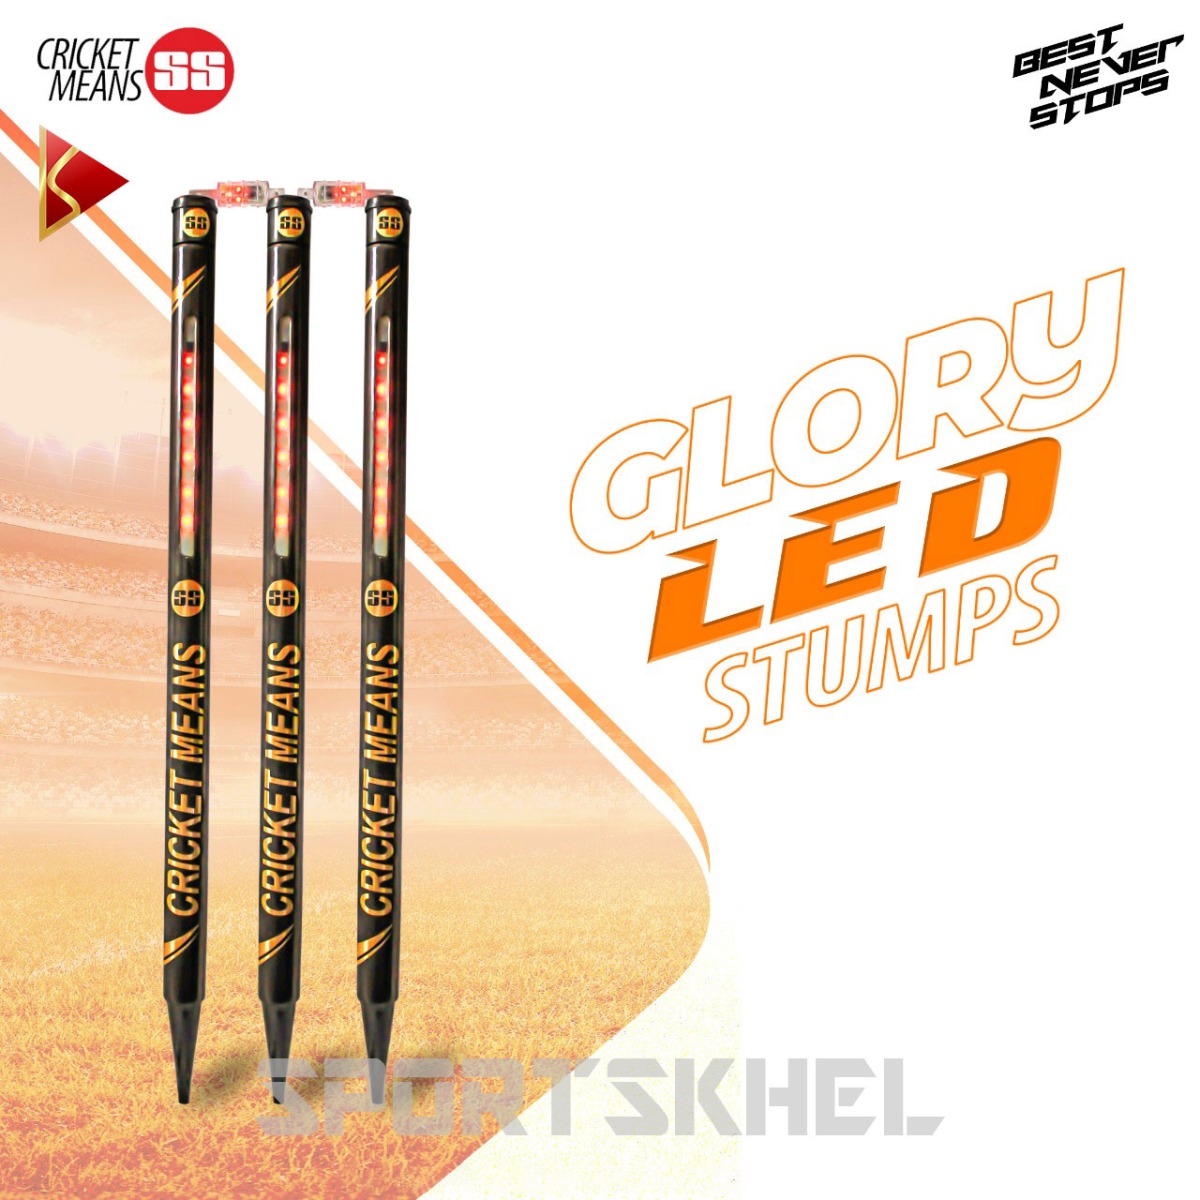 SS Glory LED Cricket Stumps and Bails Features